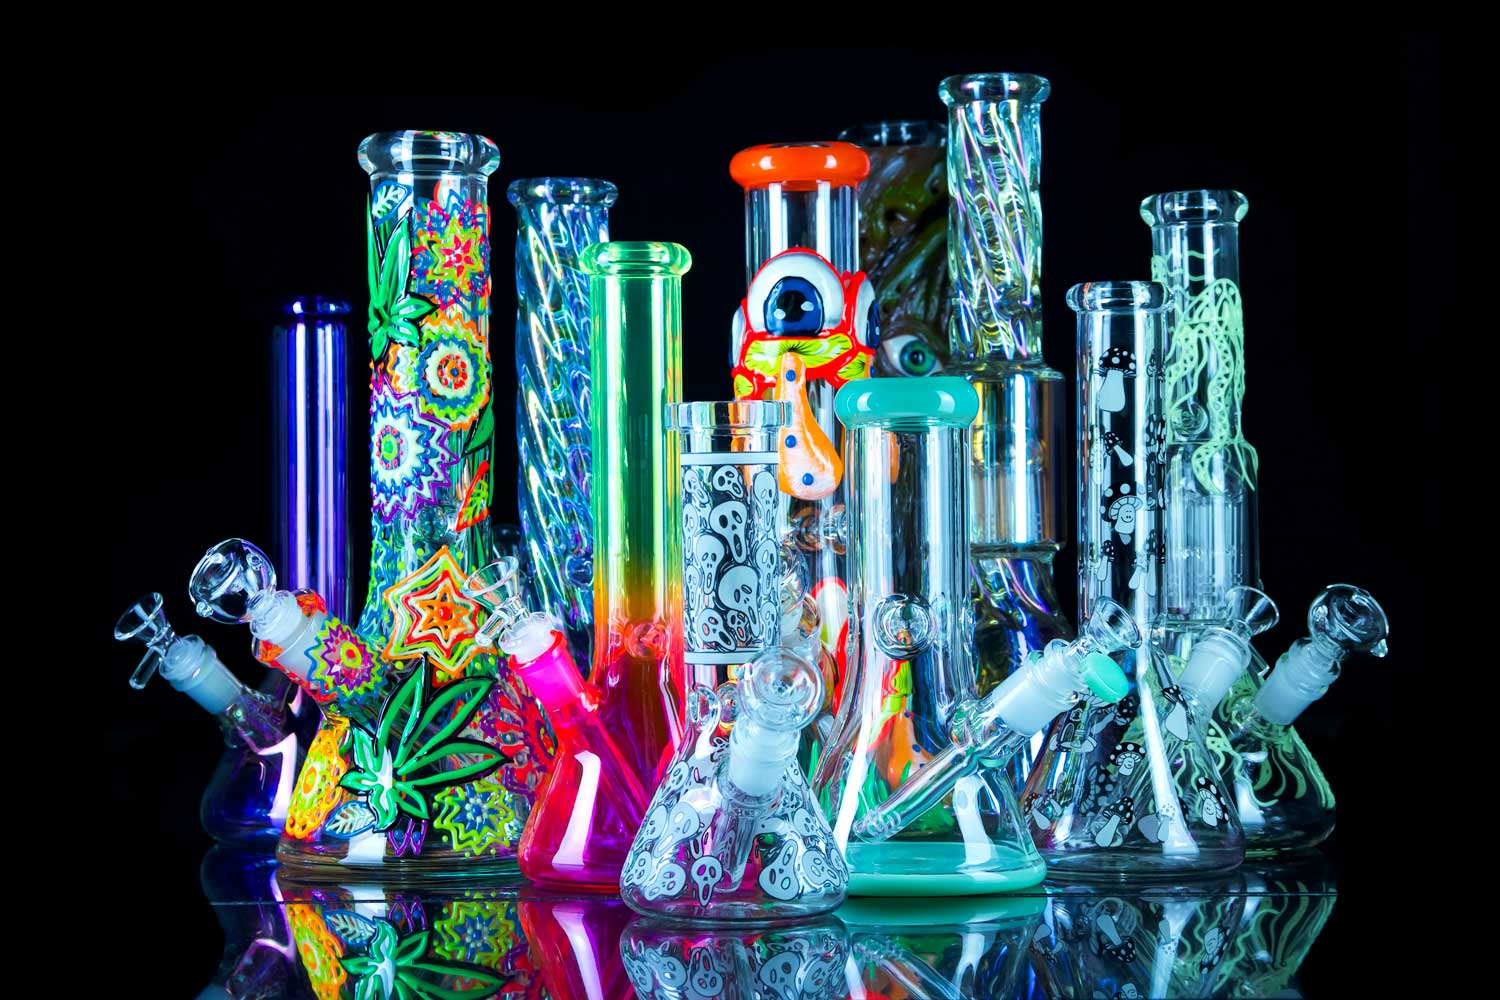 ice bongs for sale on black table